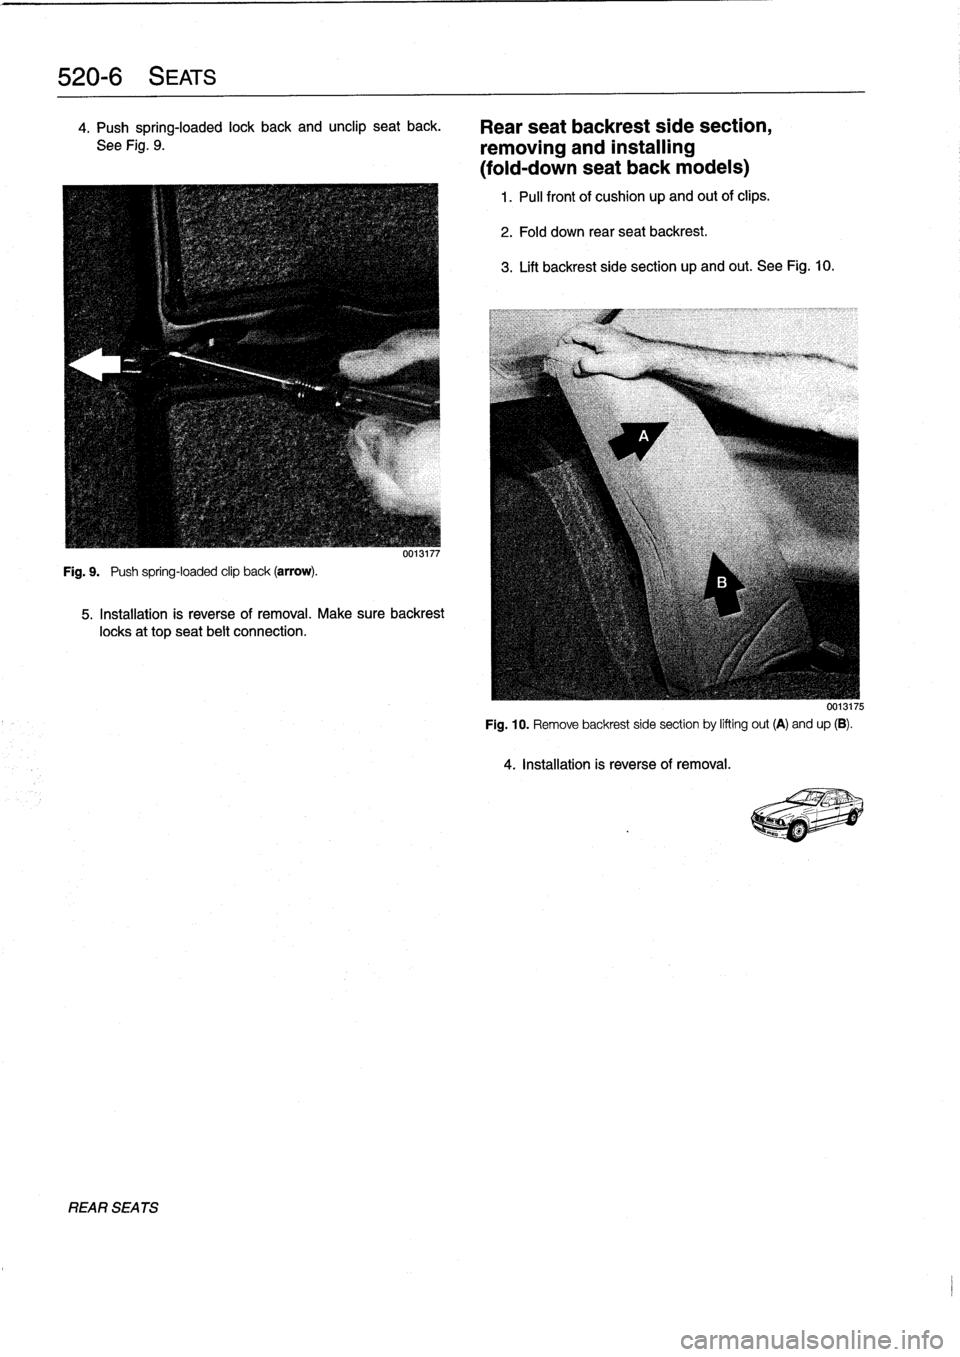 BMW M3 1996 E36 Workshop Manual 
520-
6
SEATS

4
.
Push
spring-loaded
lock
back
and
unclip
seat
back
.

See
Fig
.
9
.

Fig
.
9
.

	

Push
spring-loaded
clip
back
(arrow)
.

UU13117

5
.
Installation
is
reverse
of
removal
.
Make
sure